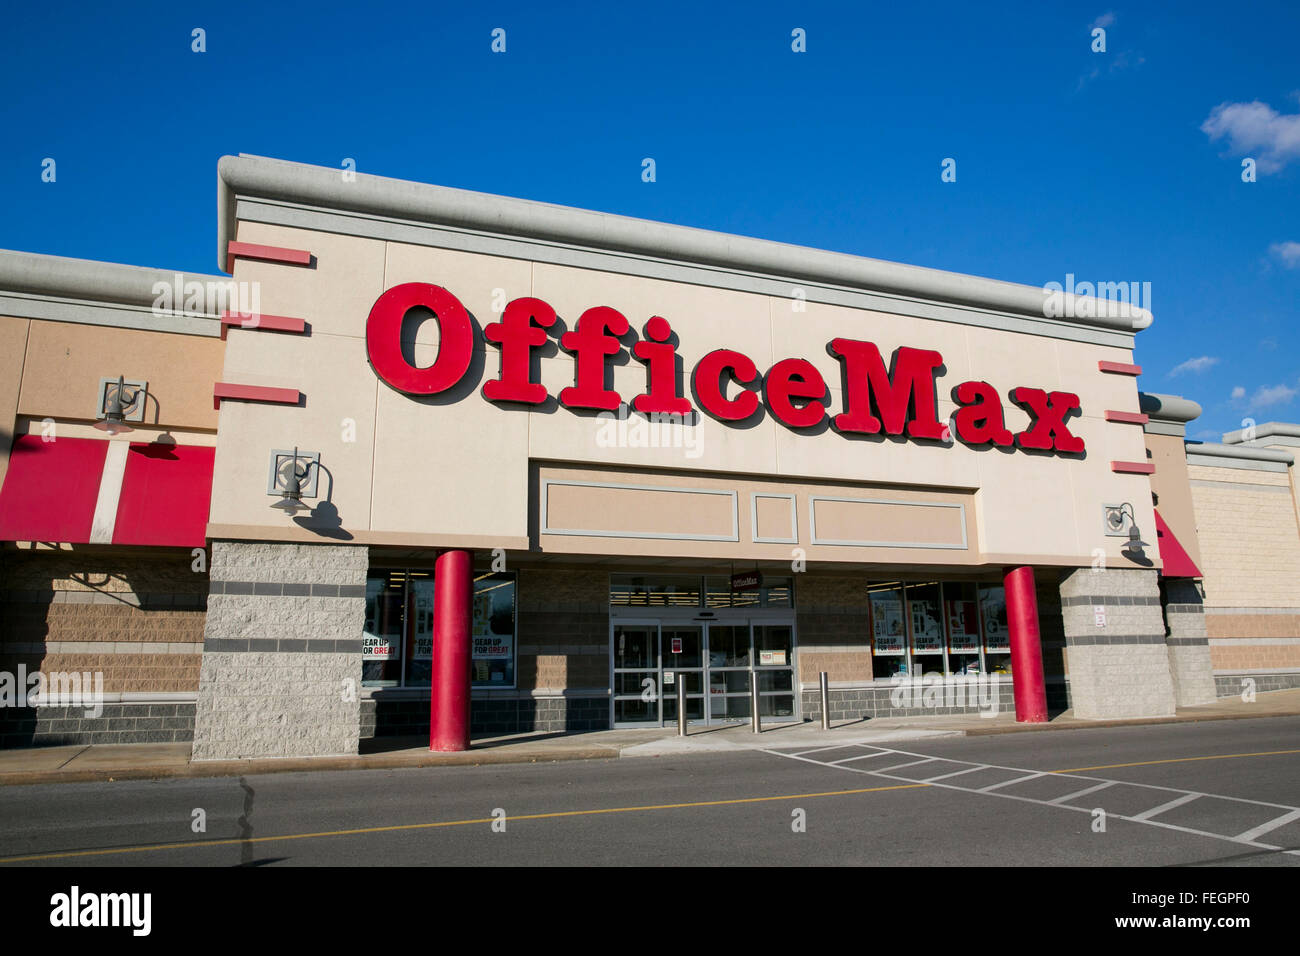 An Officemax Retail Store In Hagerstown Maryland On February 5 2016 FEGPF0 